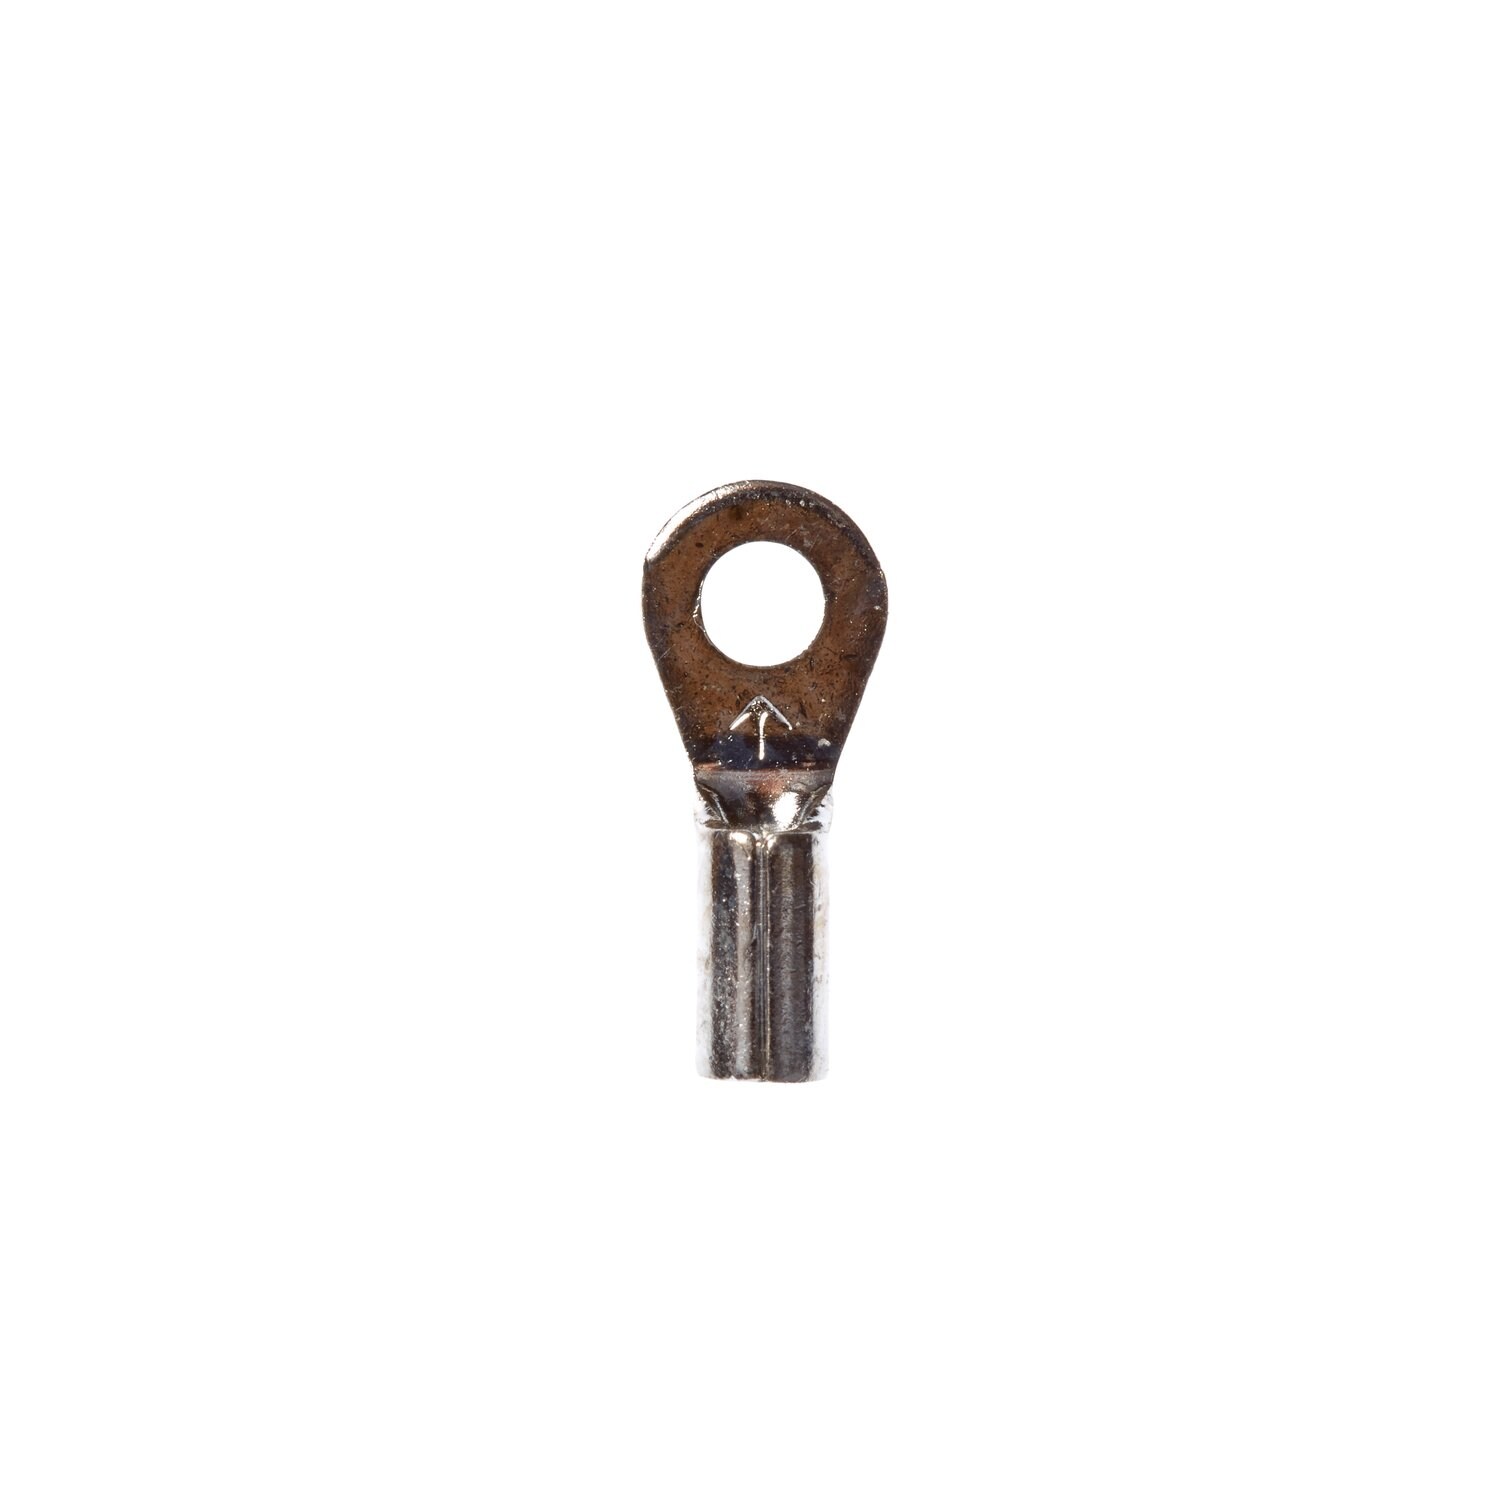 7100163915 - 3M Scotchlok Ring Tongue, Non-Insulated Butted Seam MU18-4R/SK, Stud
Size 4, 1000/Case